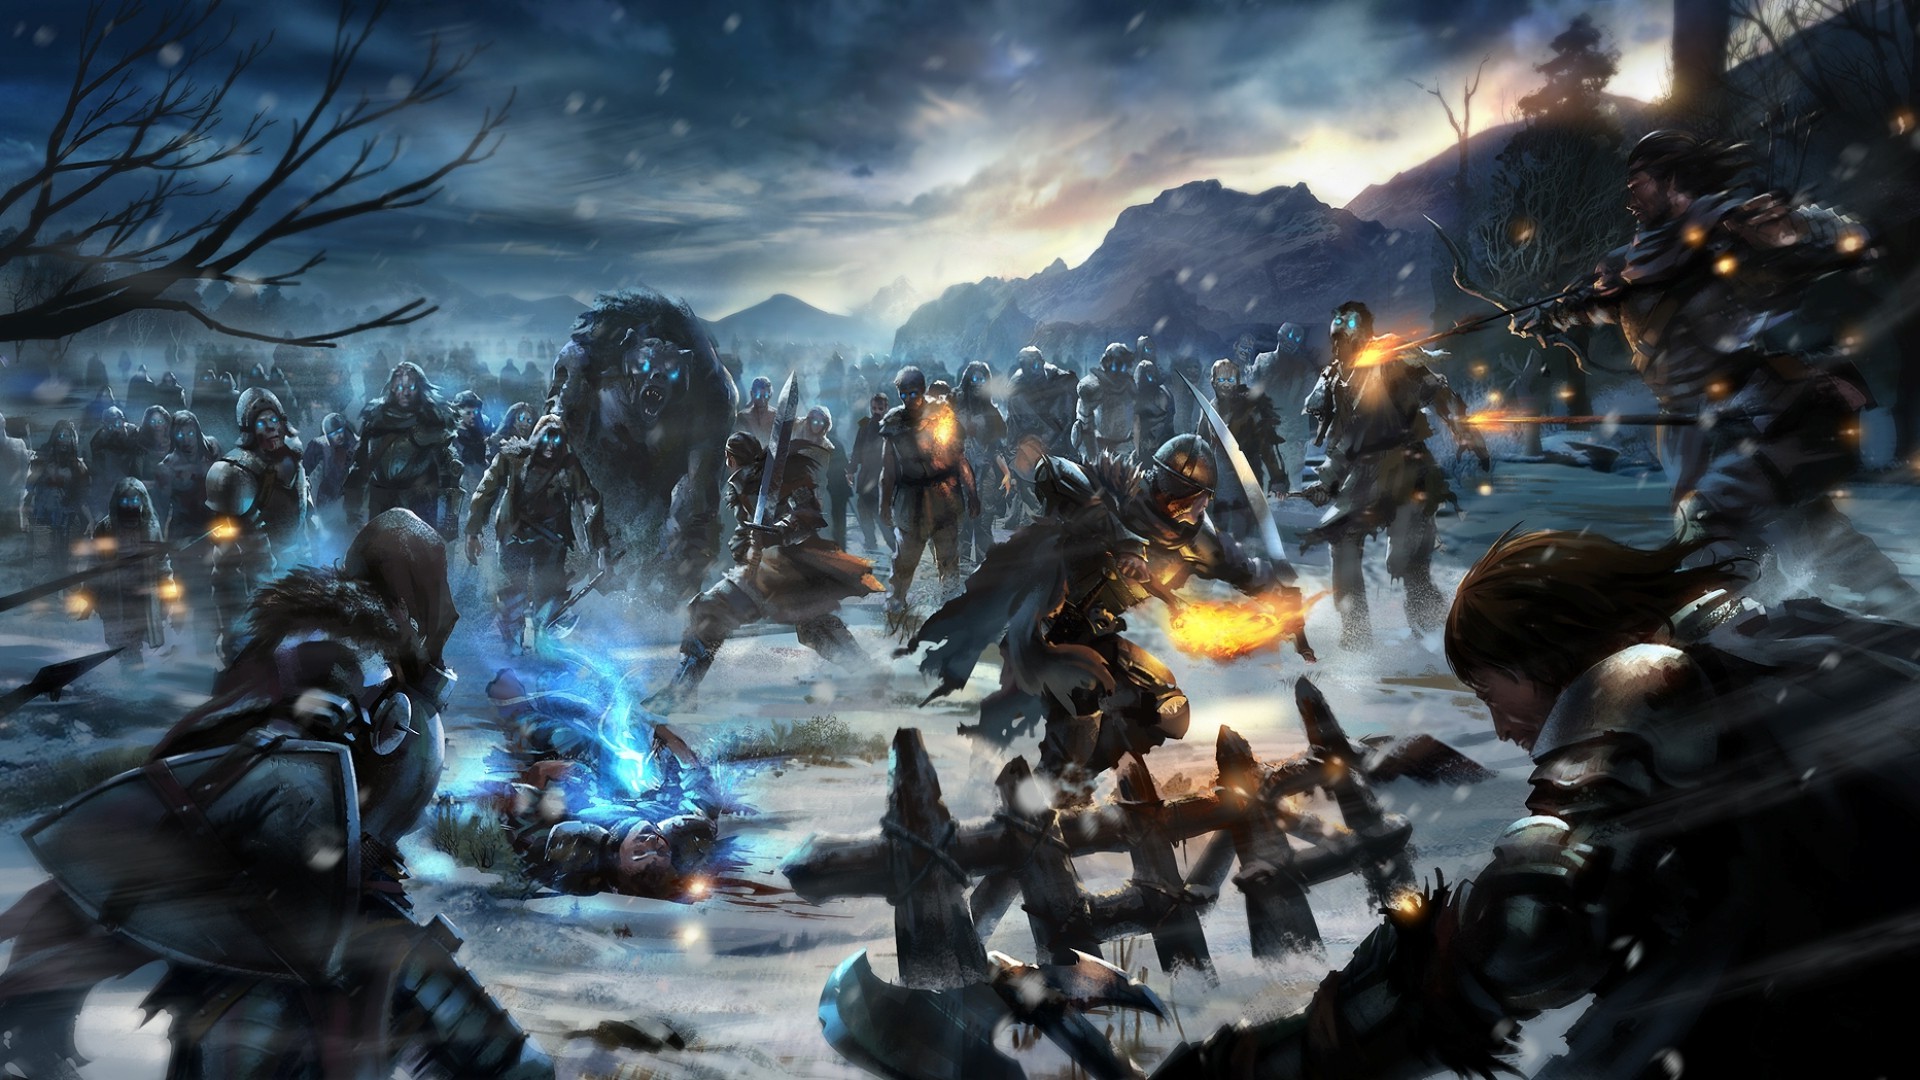  Game  Of Thrones White Walkers Video Games  Fantasy Art  